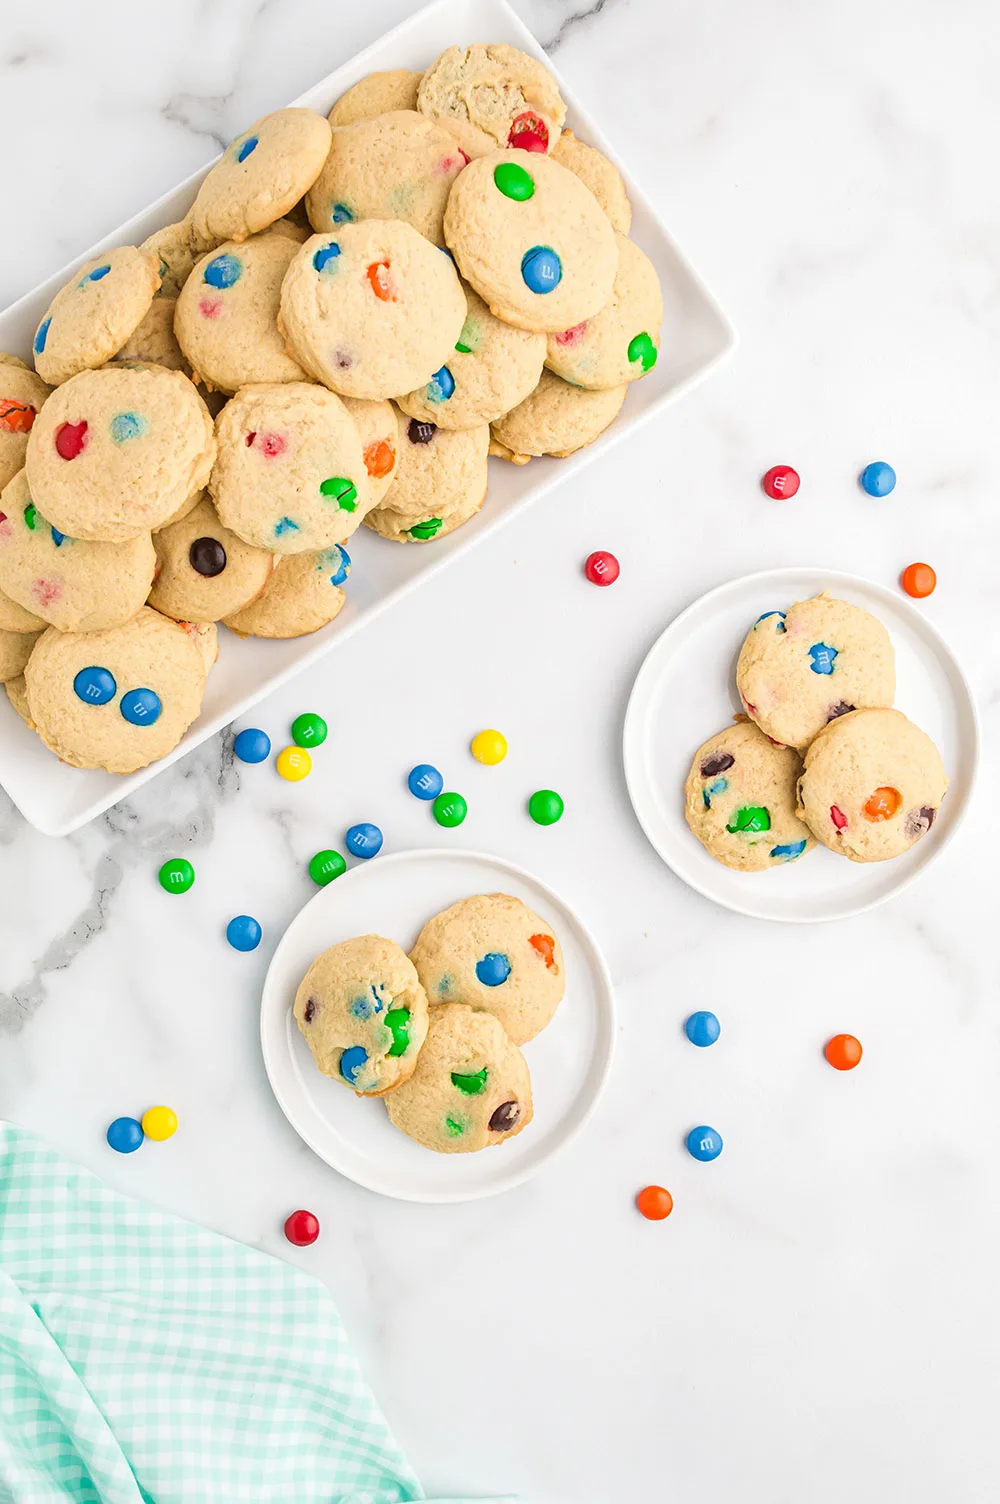 Overhead image of cookies on plates and on a tray with M&M's sprinkled on the table.